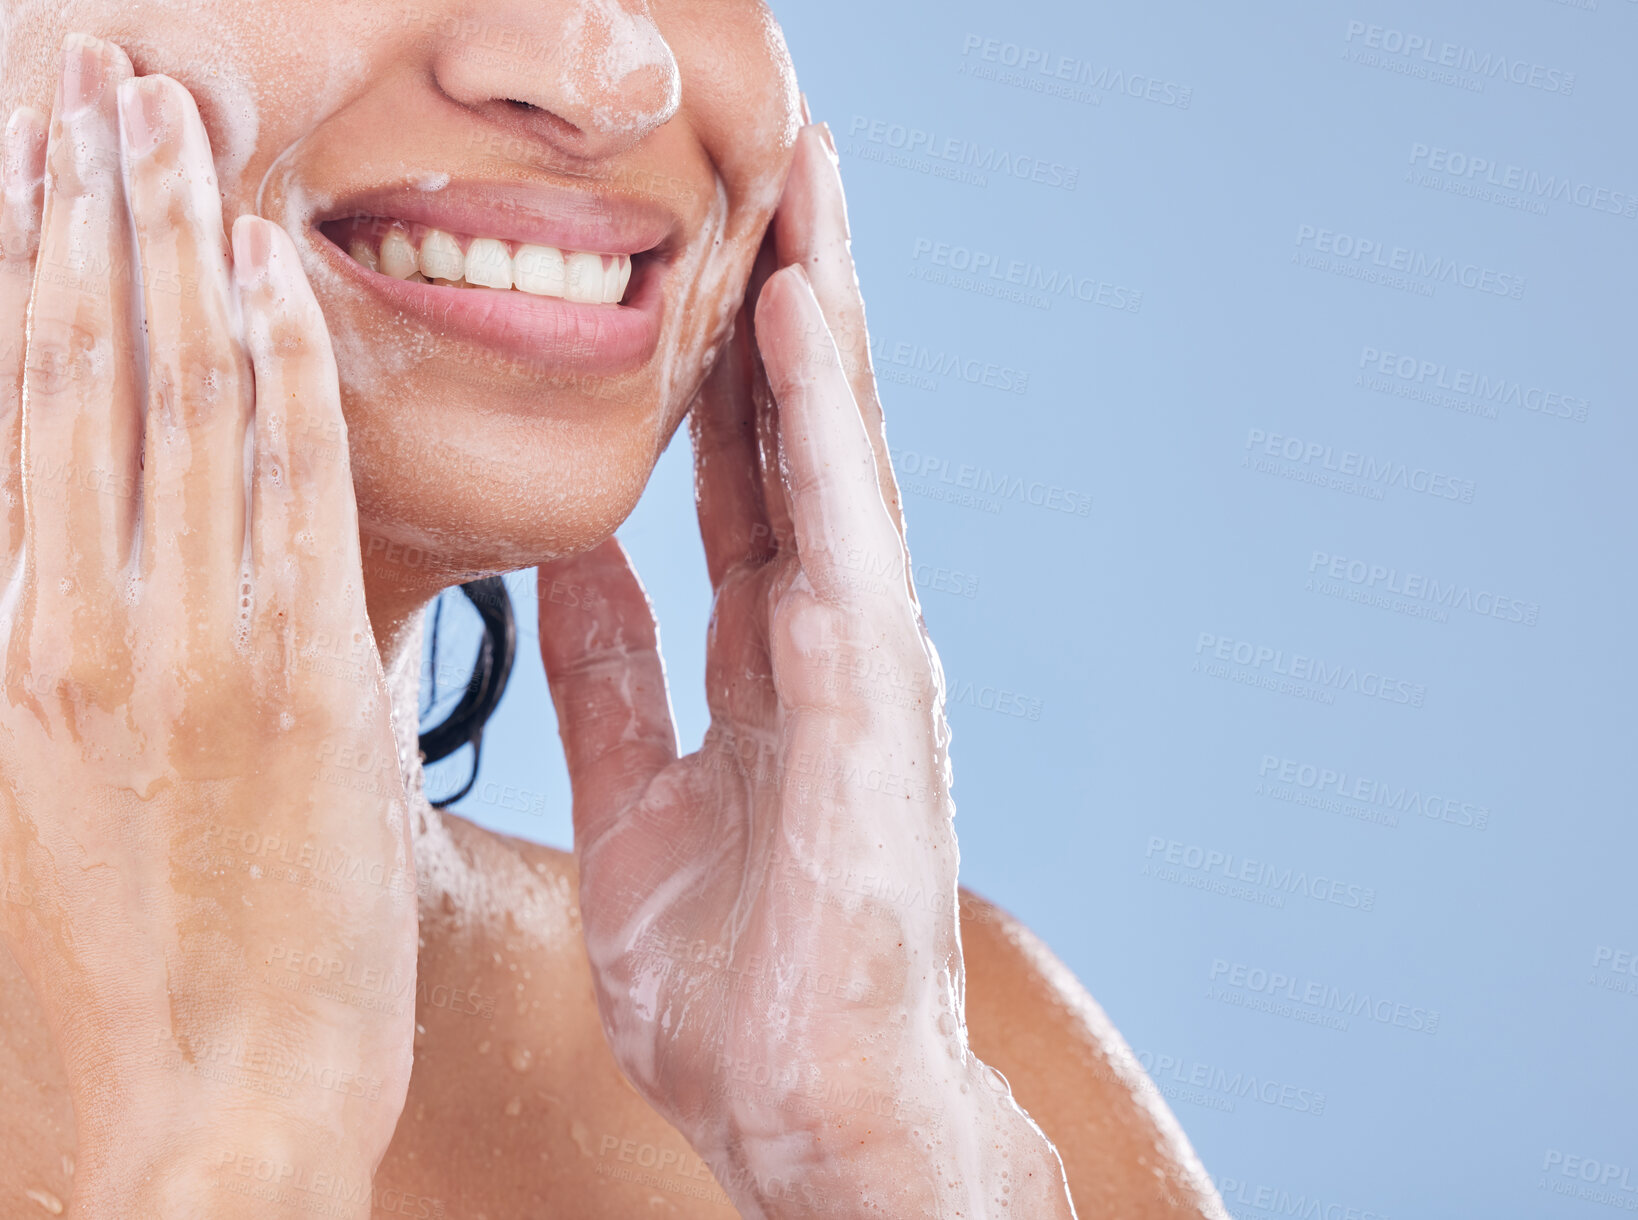 Buy stock photo Cropped shot of a young woman washing her face